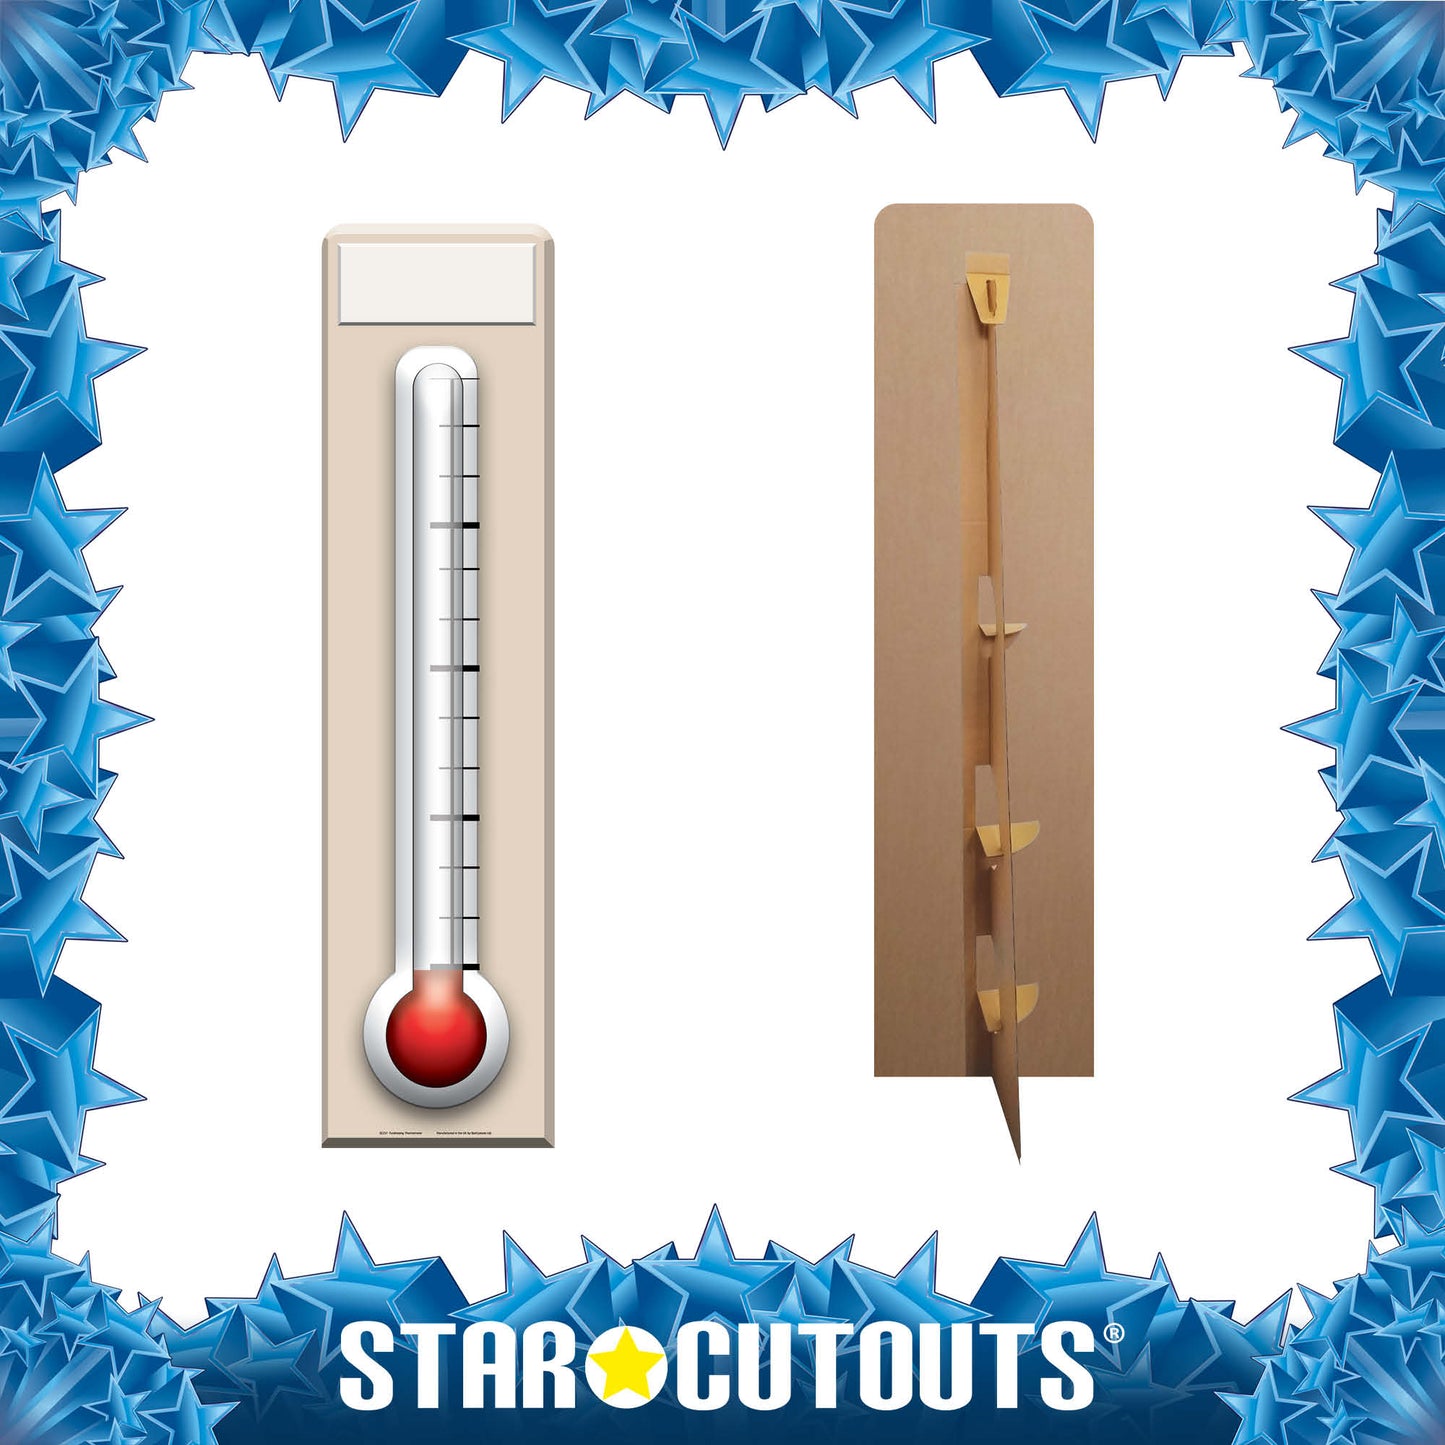 SC217 Fundraising Thermometer Cardboard Cut Out Height 188cm